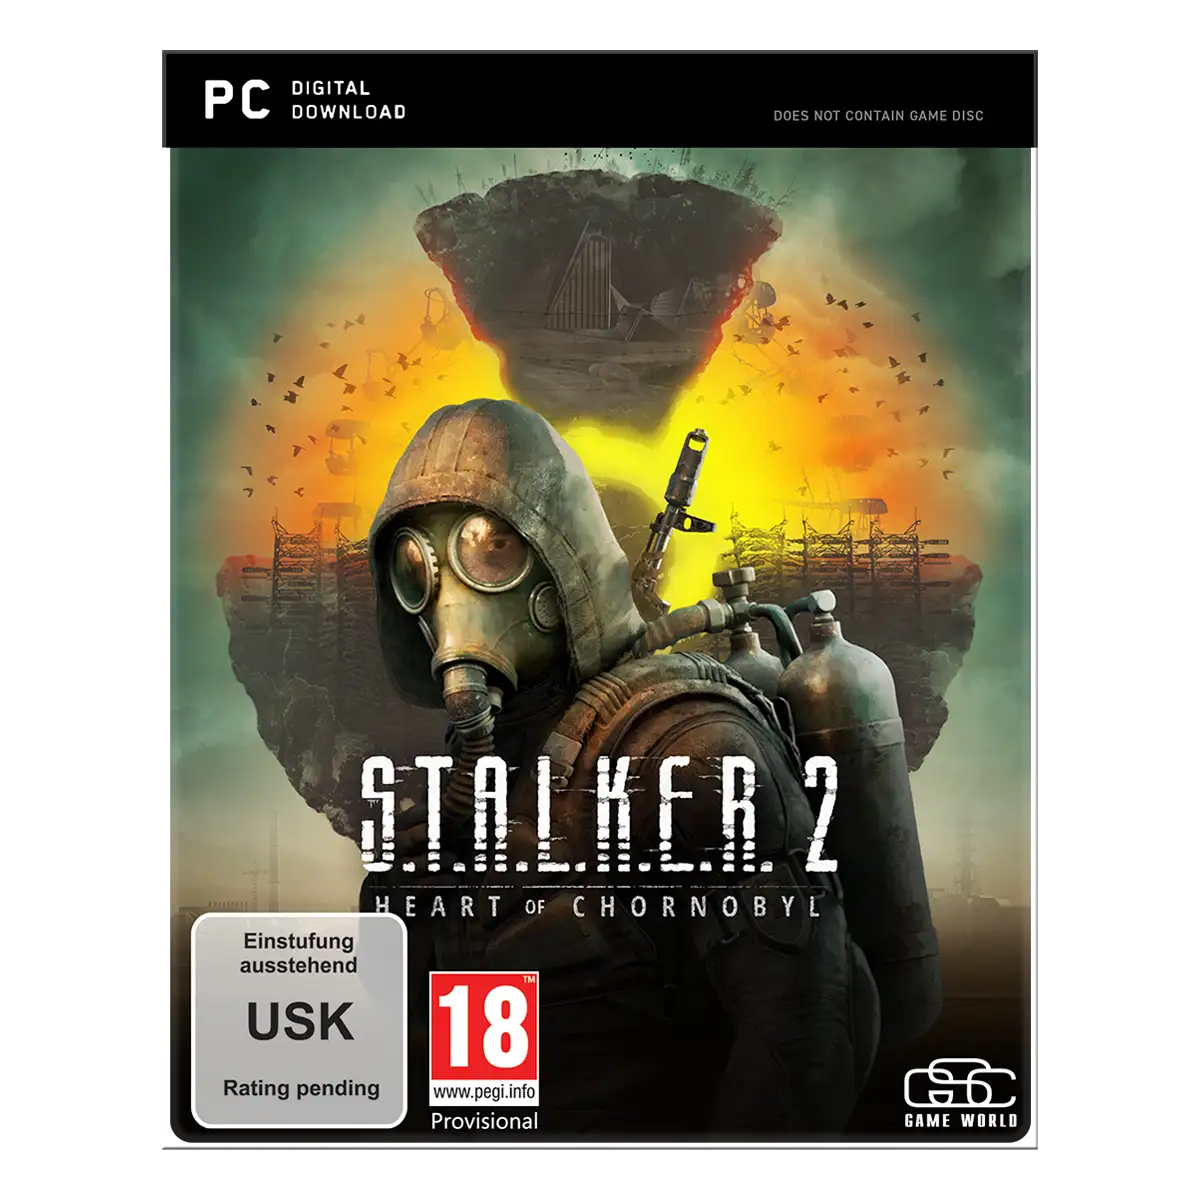 S.T.A.L.K.E.R. 2: Heart of Chornobyl Day One Steelbook Edition (PC) Thumbnail 1